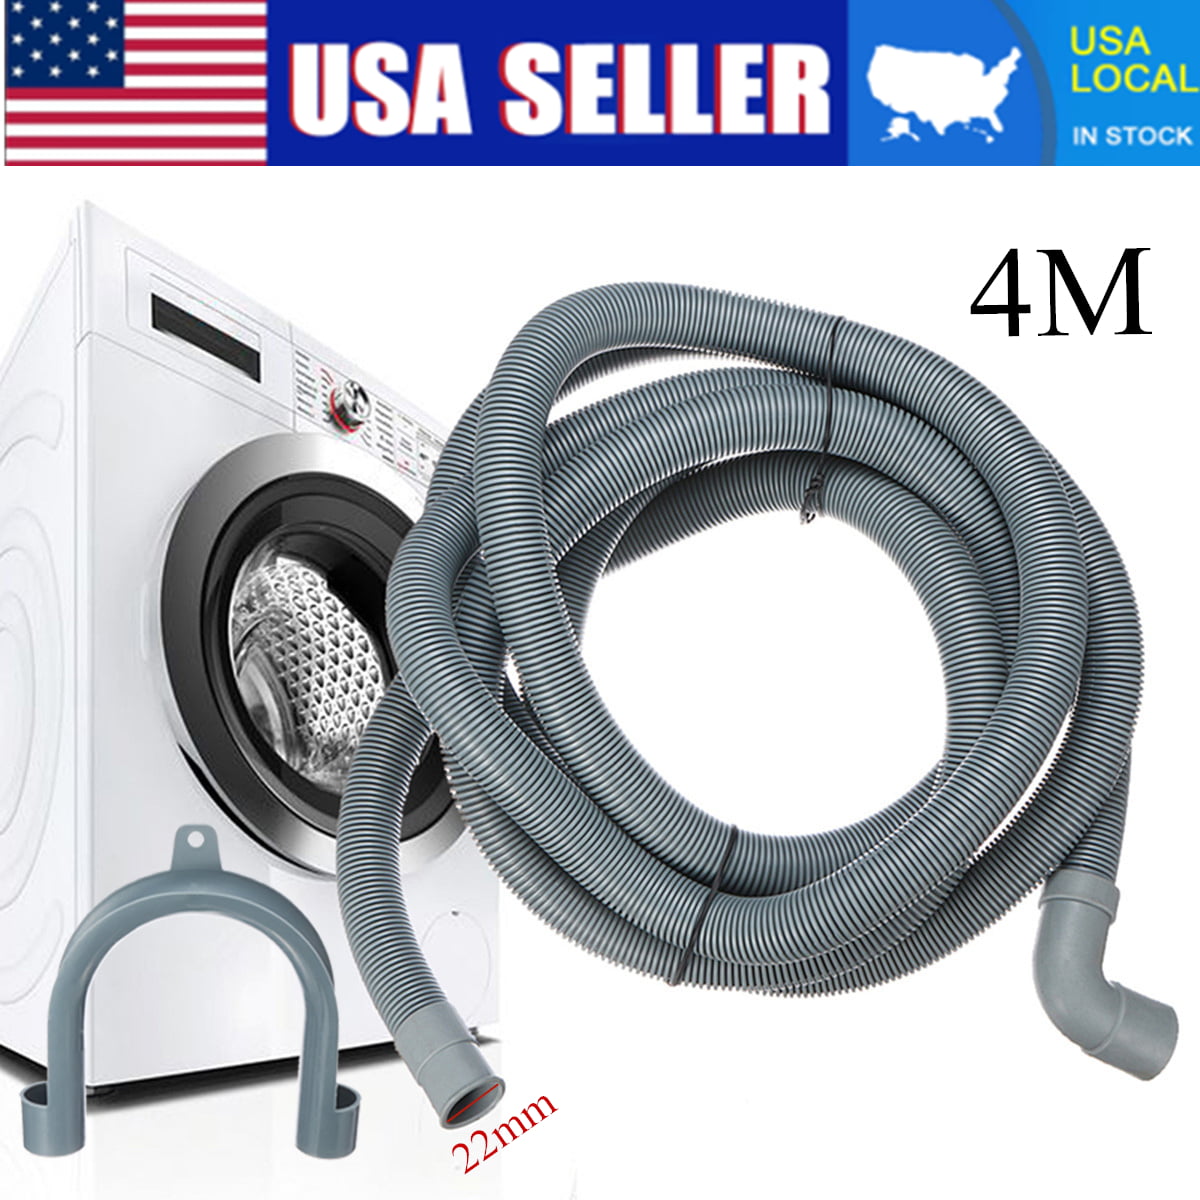 UNIVERSAL Washing Machine Drain Hose Washer Dryer Outlet Water Pipe 4m 19 & 22mm